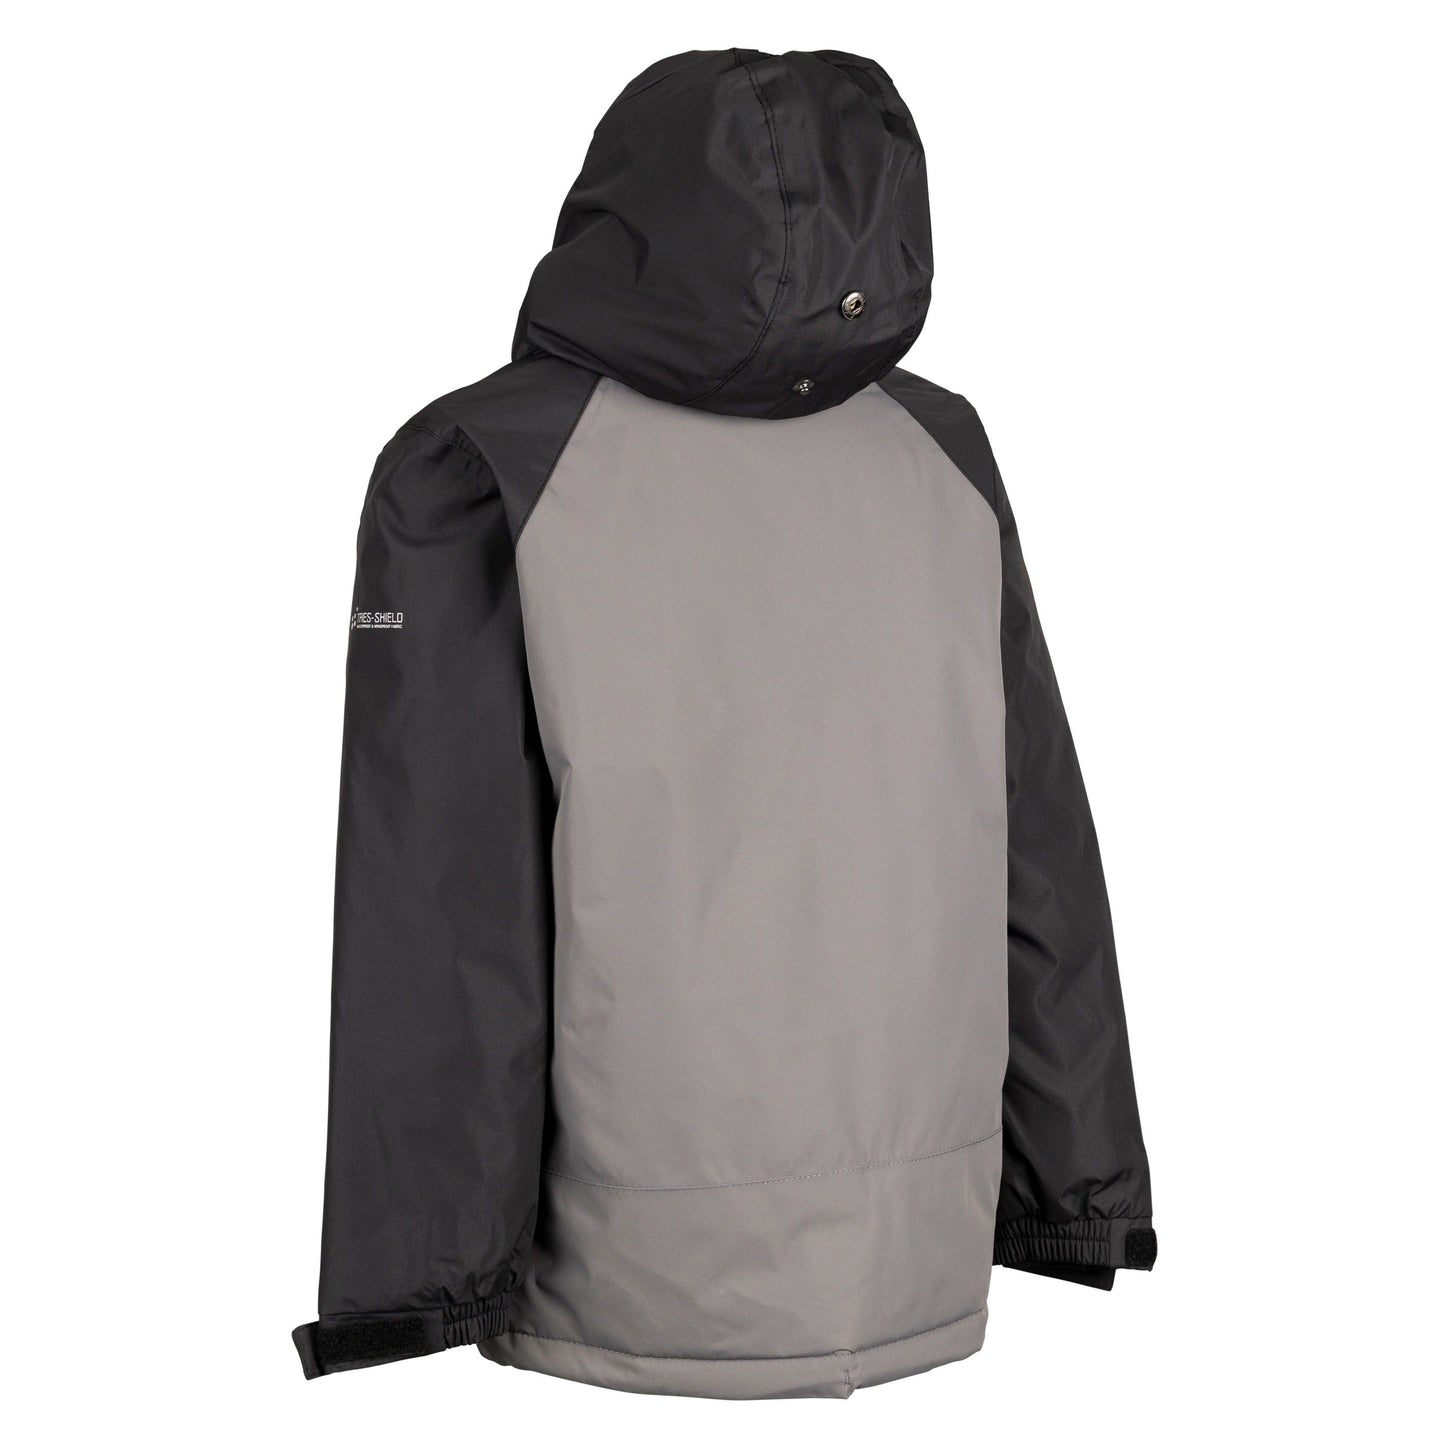 Discover Boys Padded Waterproof Jacket in Storm Grey